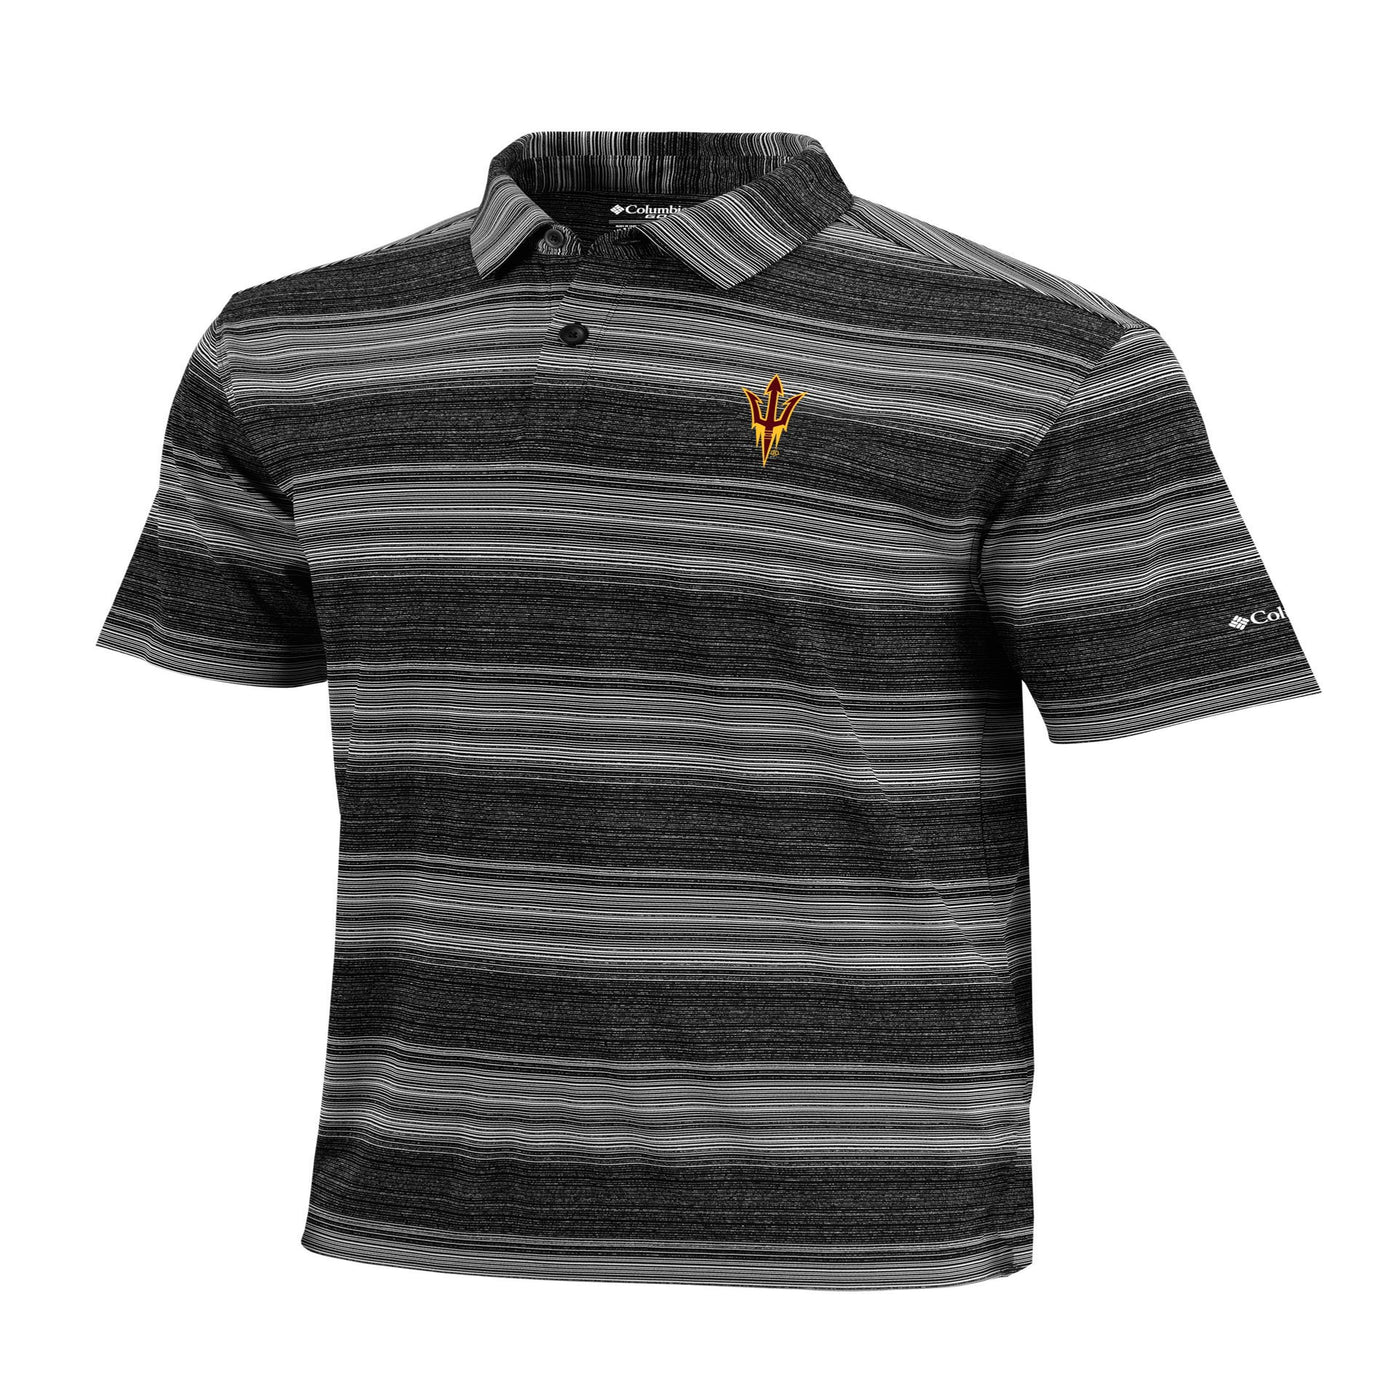 ASU black and gray horizontal striped polo with pitchfork on left upper breast